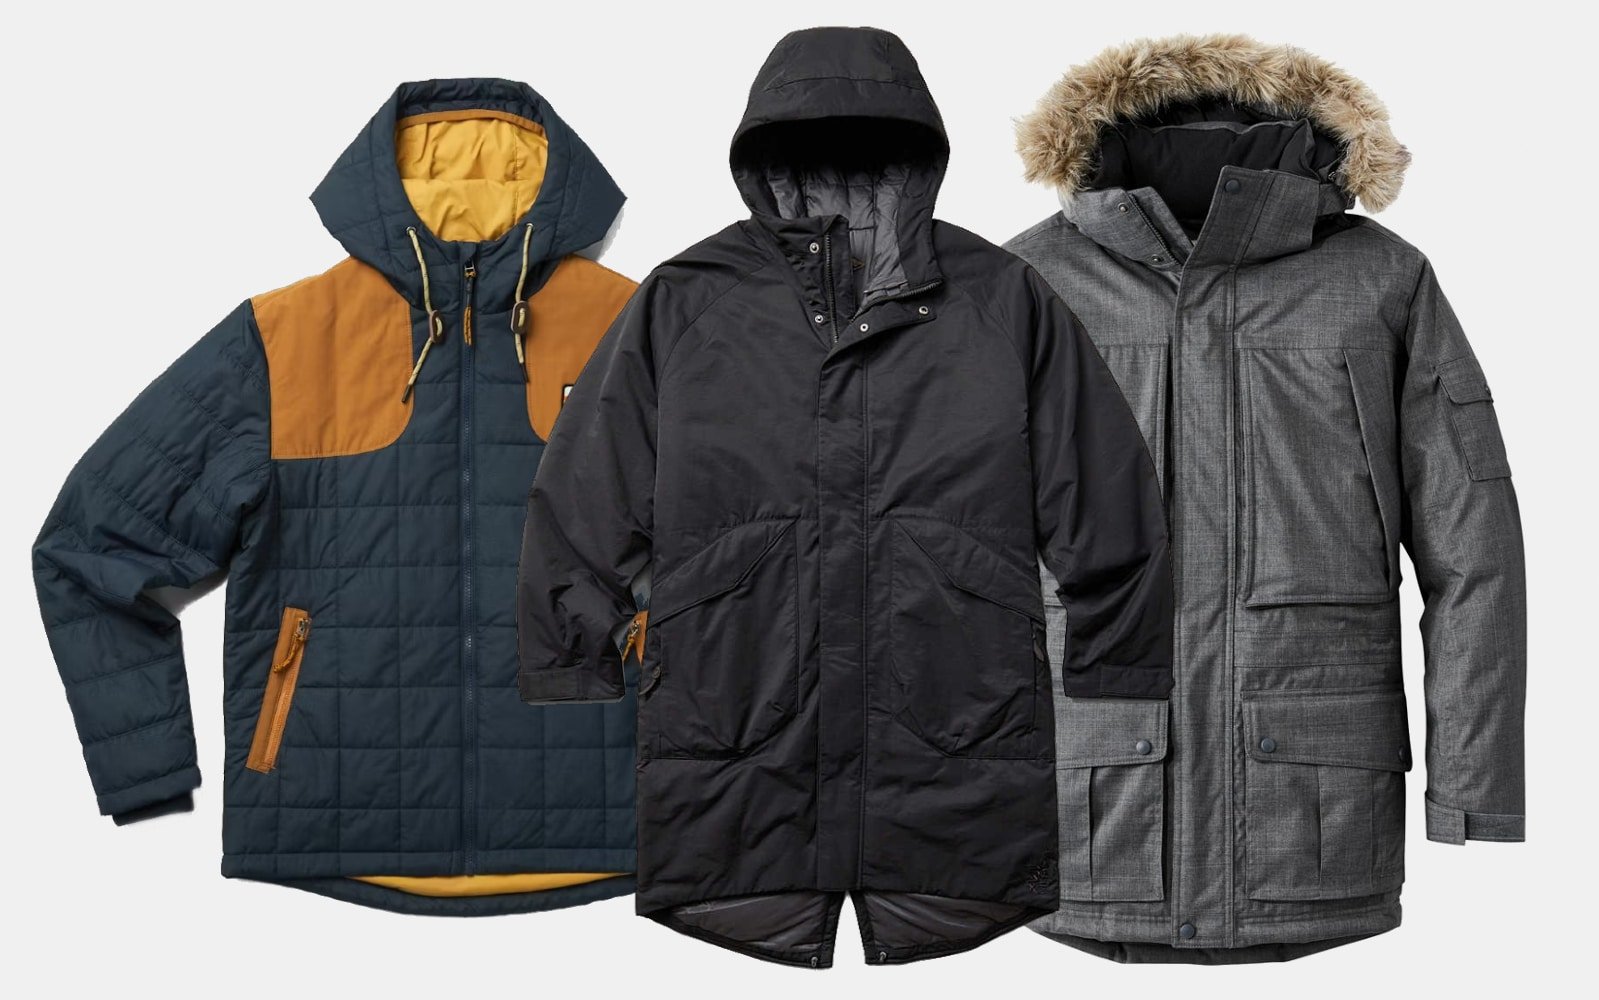 Best Men's Winter Parkas For Staying Warm This Winter